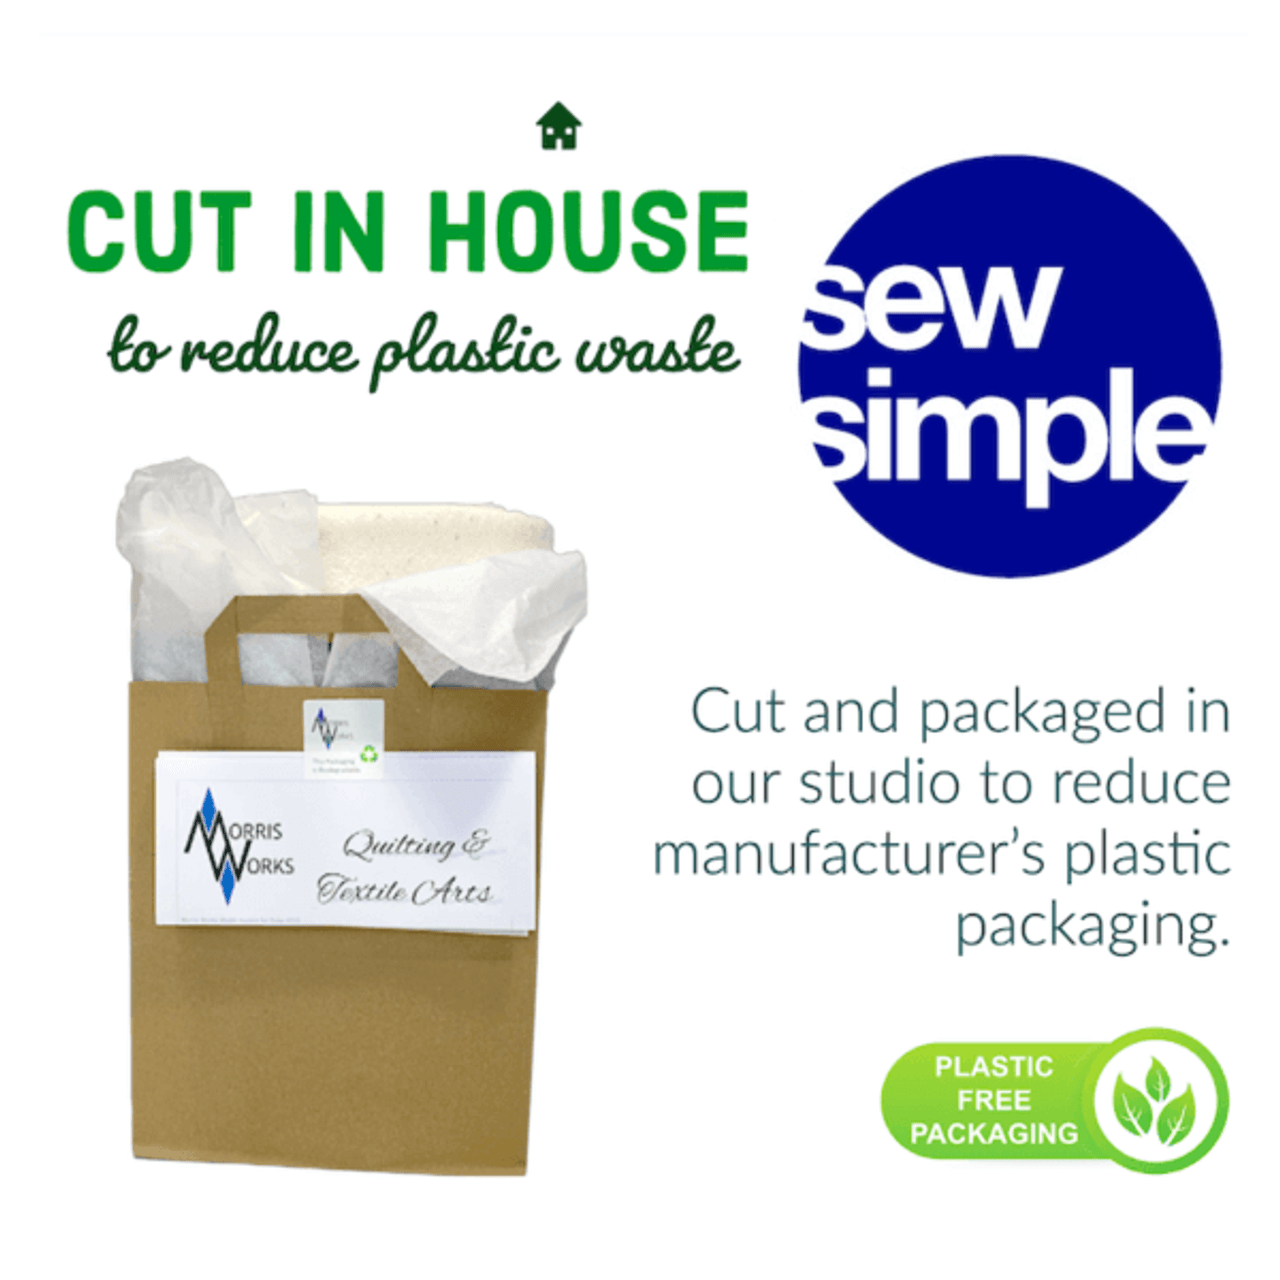 All Sew Simple wadding is cut in house to reduce manufacturer's plastic packaging